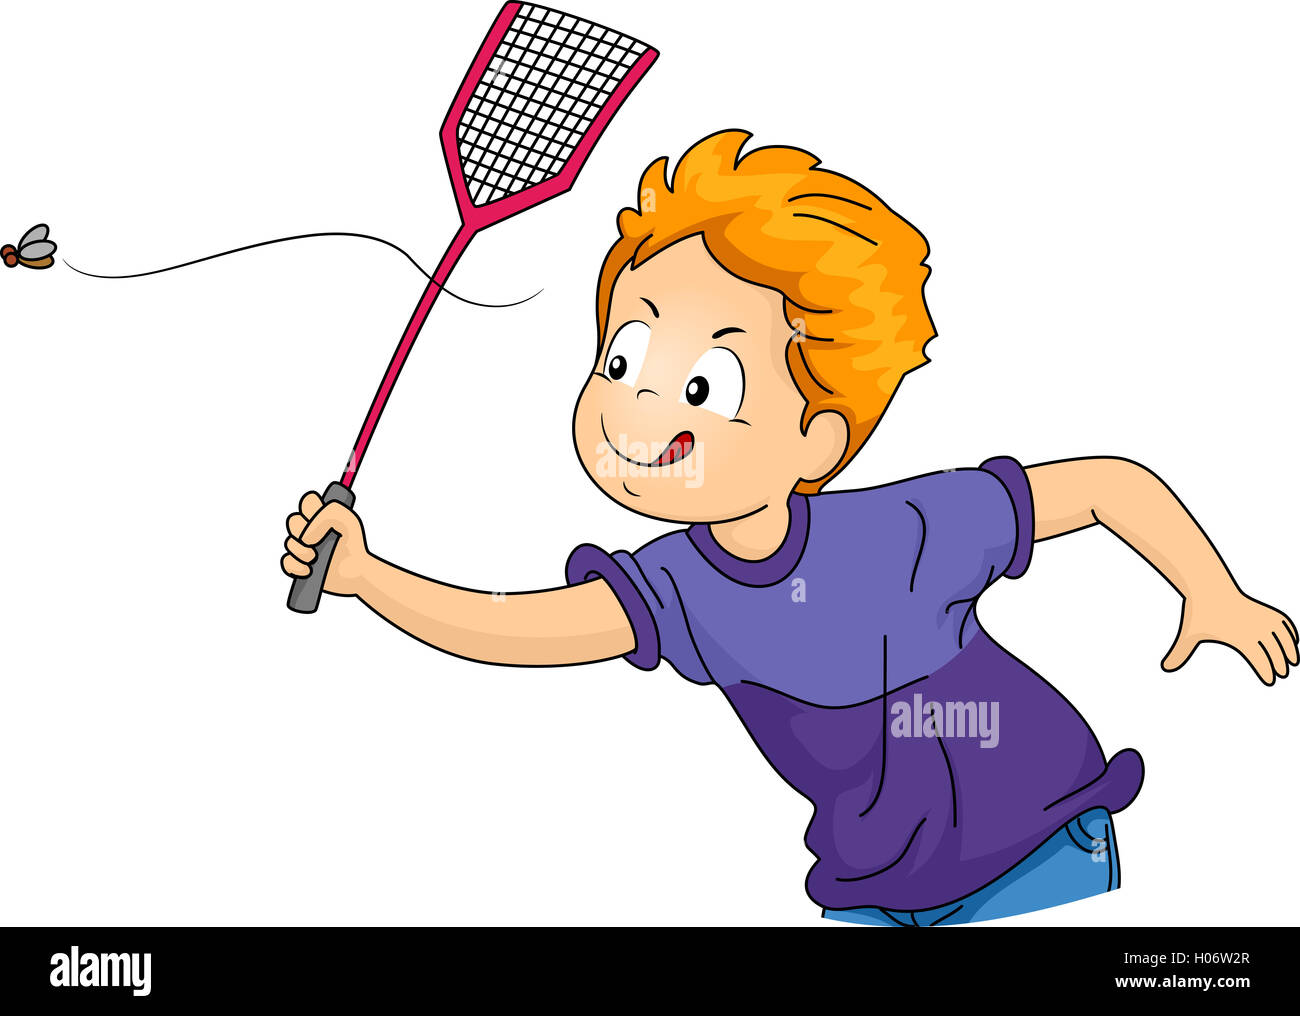 Illustration of a Little Boy Swatting a Fly Stock Photo